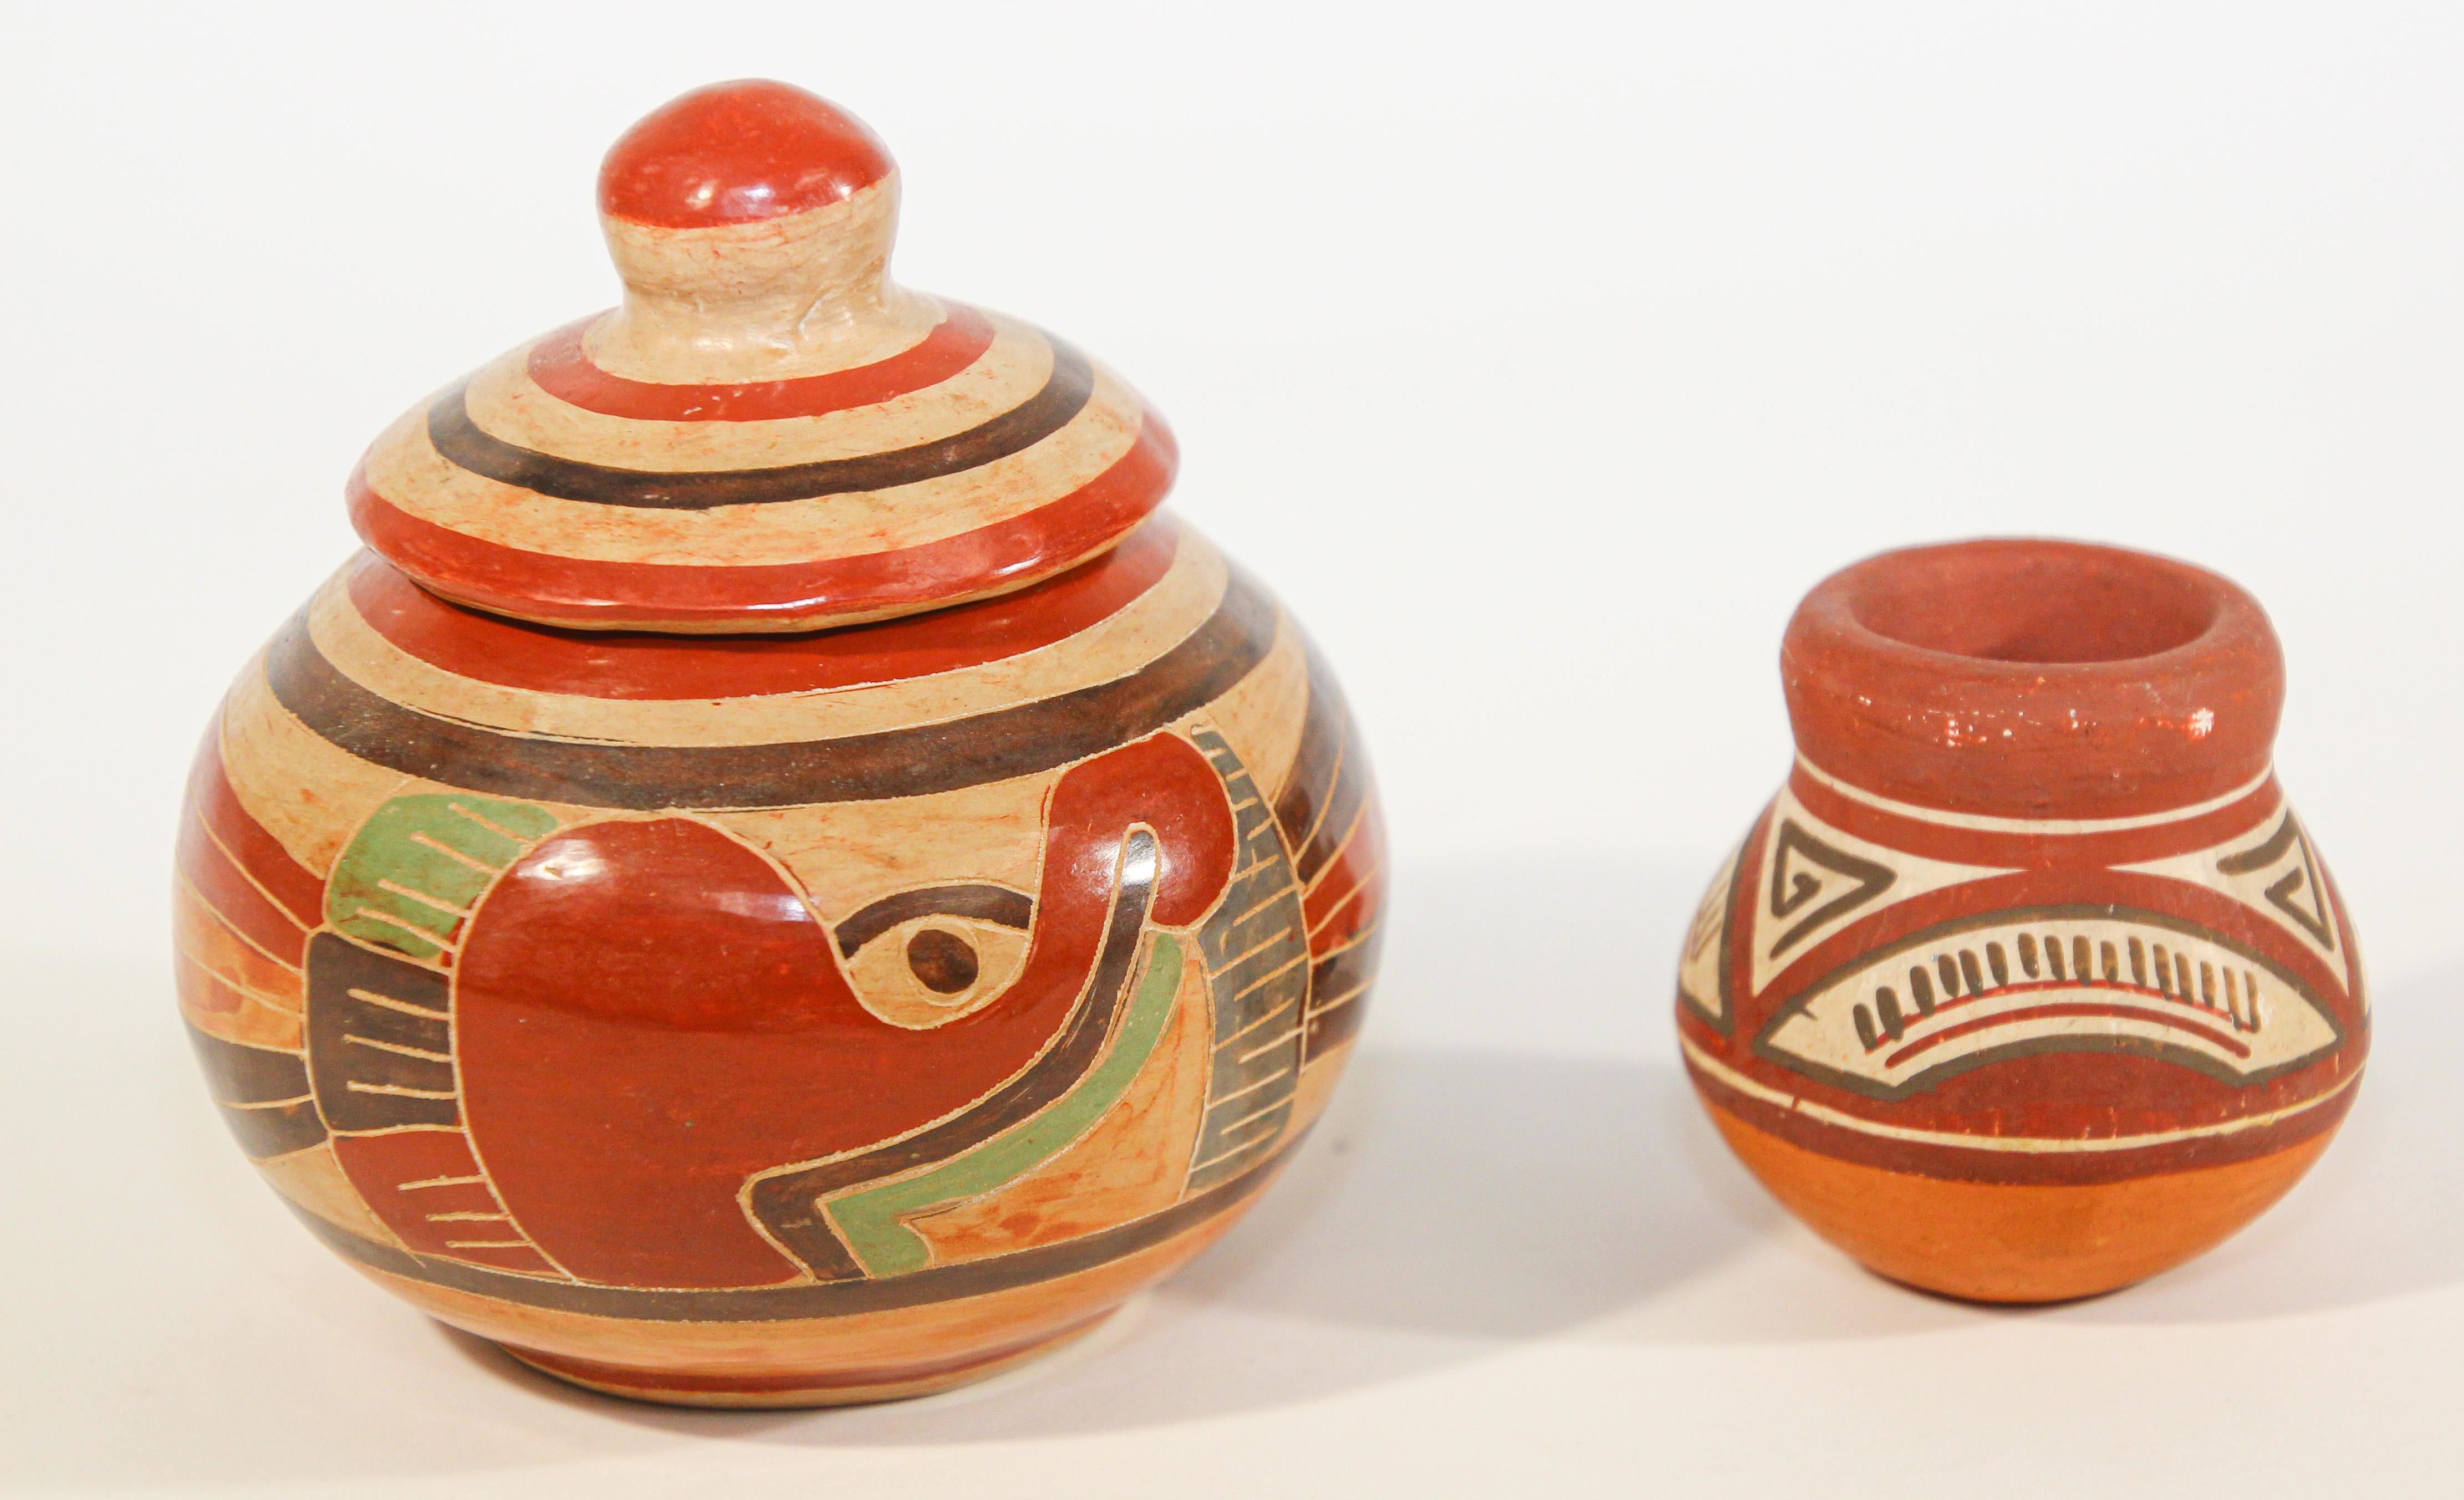 Vintage Mexican Mata Ortiz style small clay studio pottery set.
Mata Ortiz pottery style with black, red and green geometric designs on red clay.
The set comprise of a covered vessel:
3.5